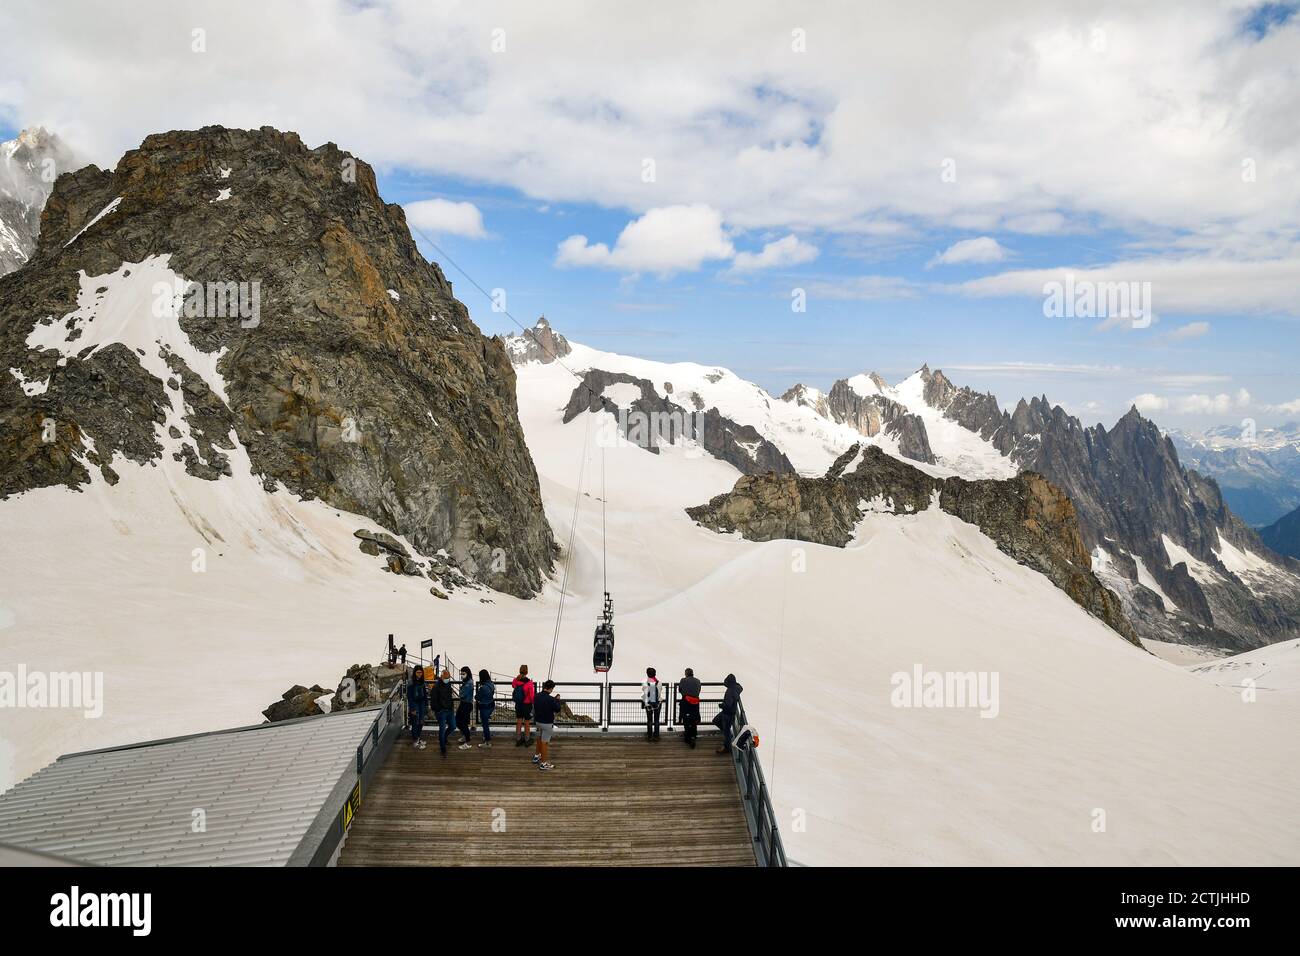 Vallée Blanche Cable Car linking Pointe Helbronner Italian peak to the French peaks of Aiguille du Midi by passing over the Mont Blanc massif, Italy Stock Photo